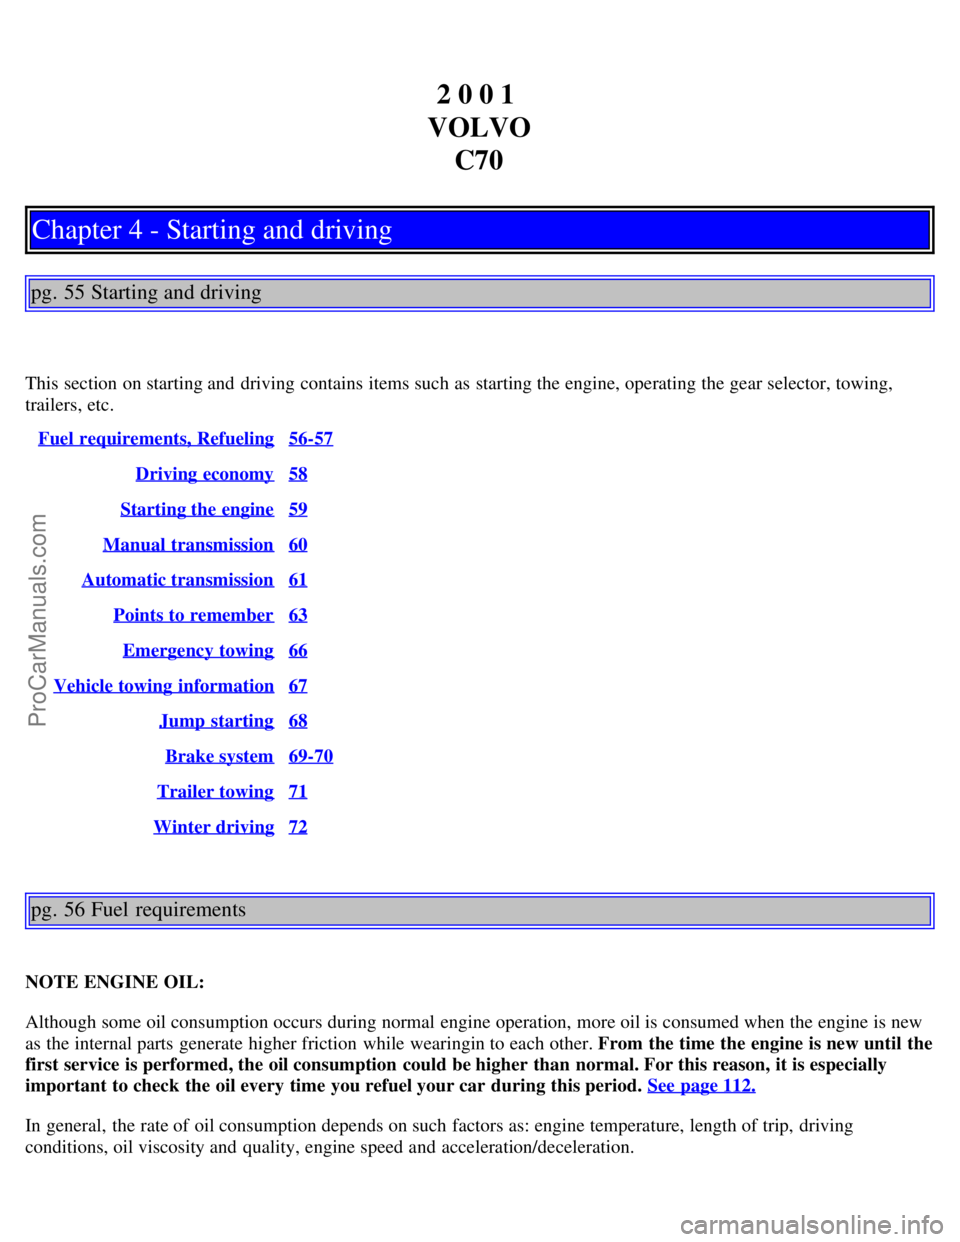 VOLVO C70 2001  Owners Manual 2 0 0 1 
VOLVO C70
Chapter 4 - Starting and driving
pg. 55 Starting and driving
This section on starting and  driving contains items such as starting the engine, operating the gear selector, towing,
t